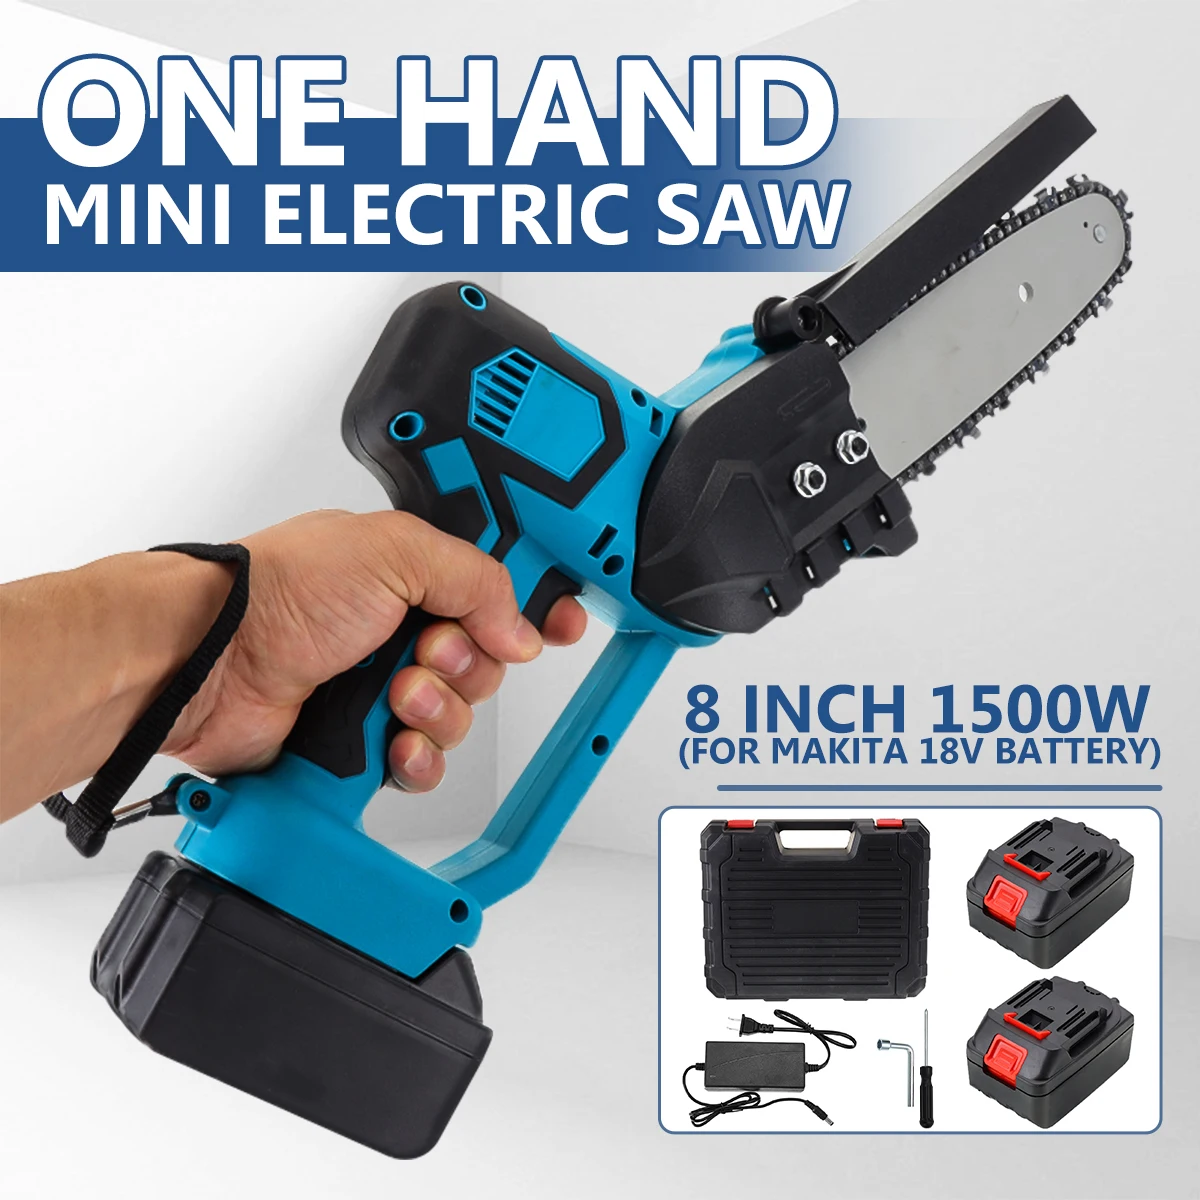 8 Inch One-Hand Chainsaw 1500W Electric Saw Brushless Woodworking Cutter Garden Logging Power Tool for Makita Battery